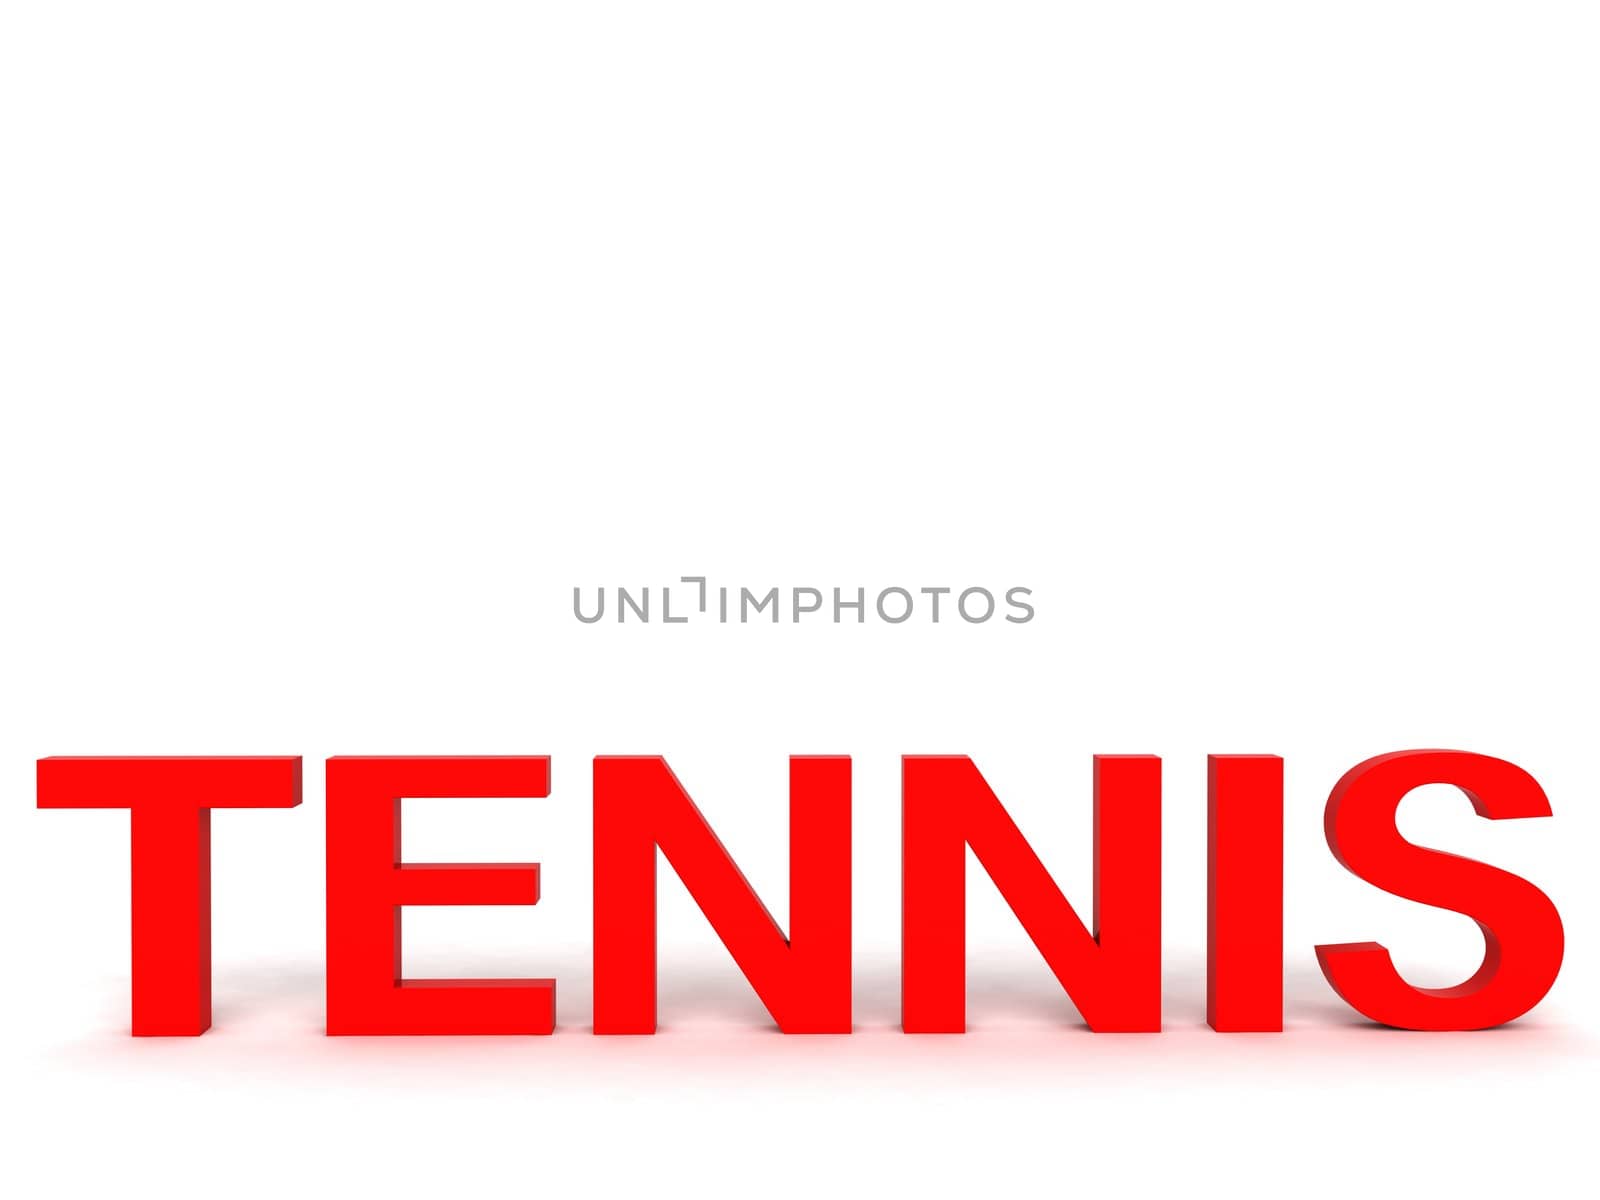 tennis text  by imagerymajestic